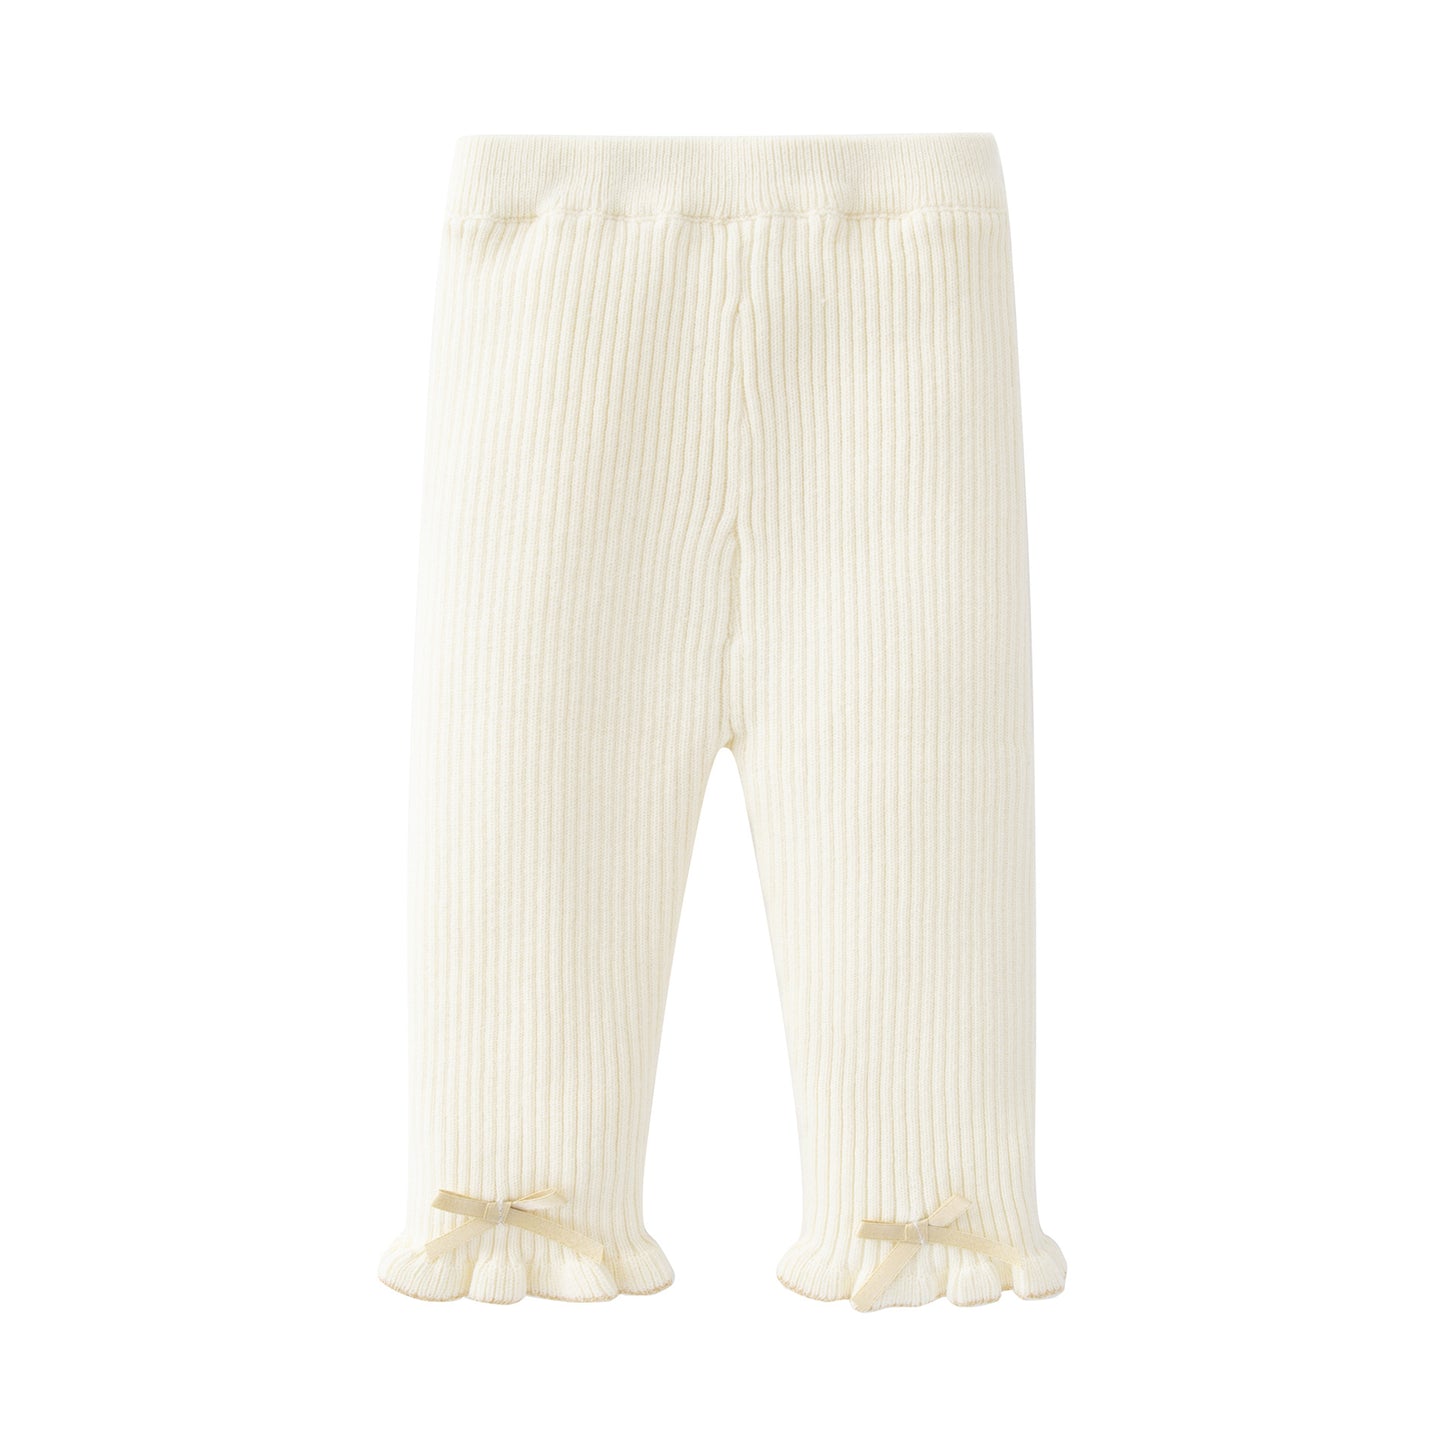 Baby Girl Bow Tie Patched Design Comfy Pants